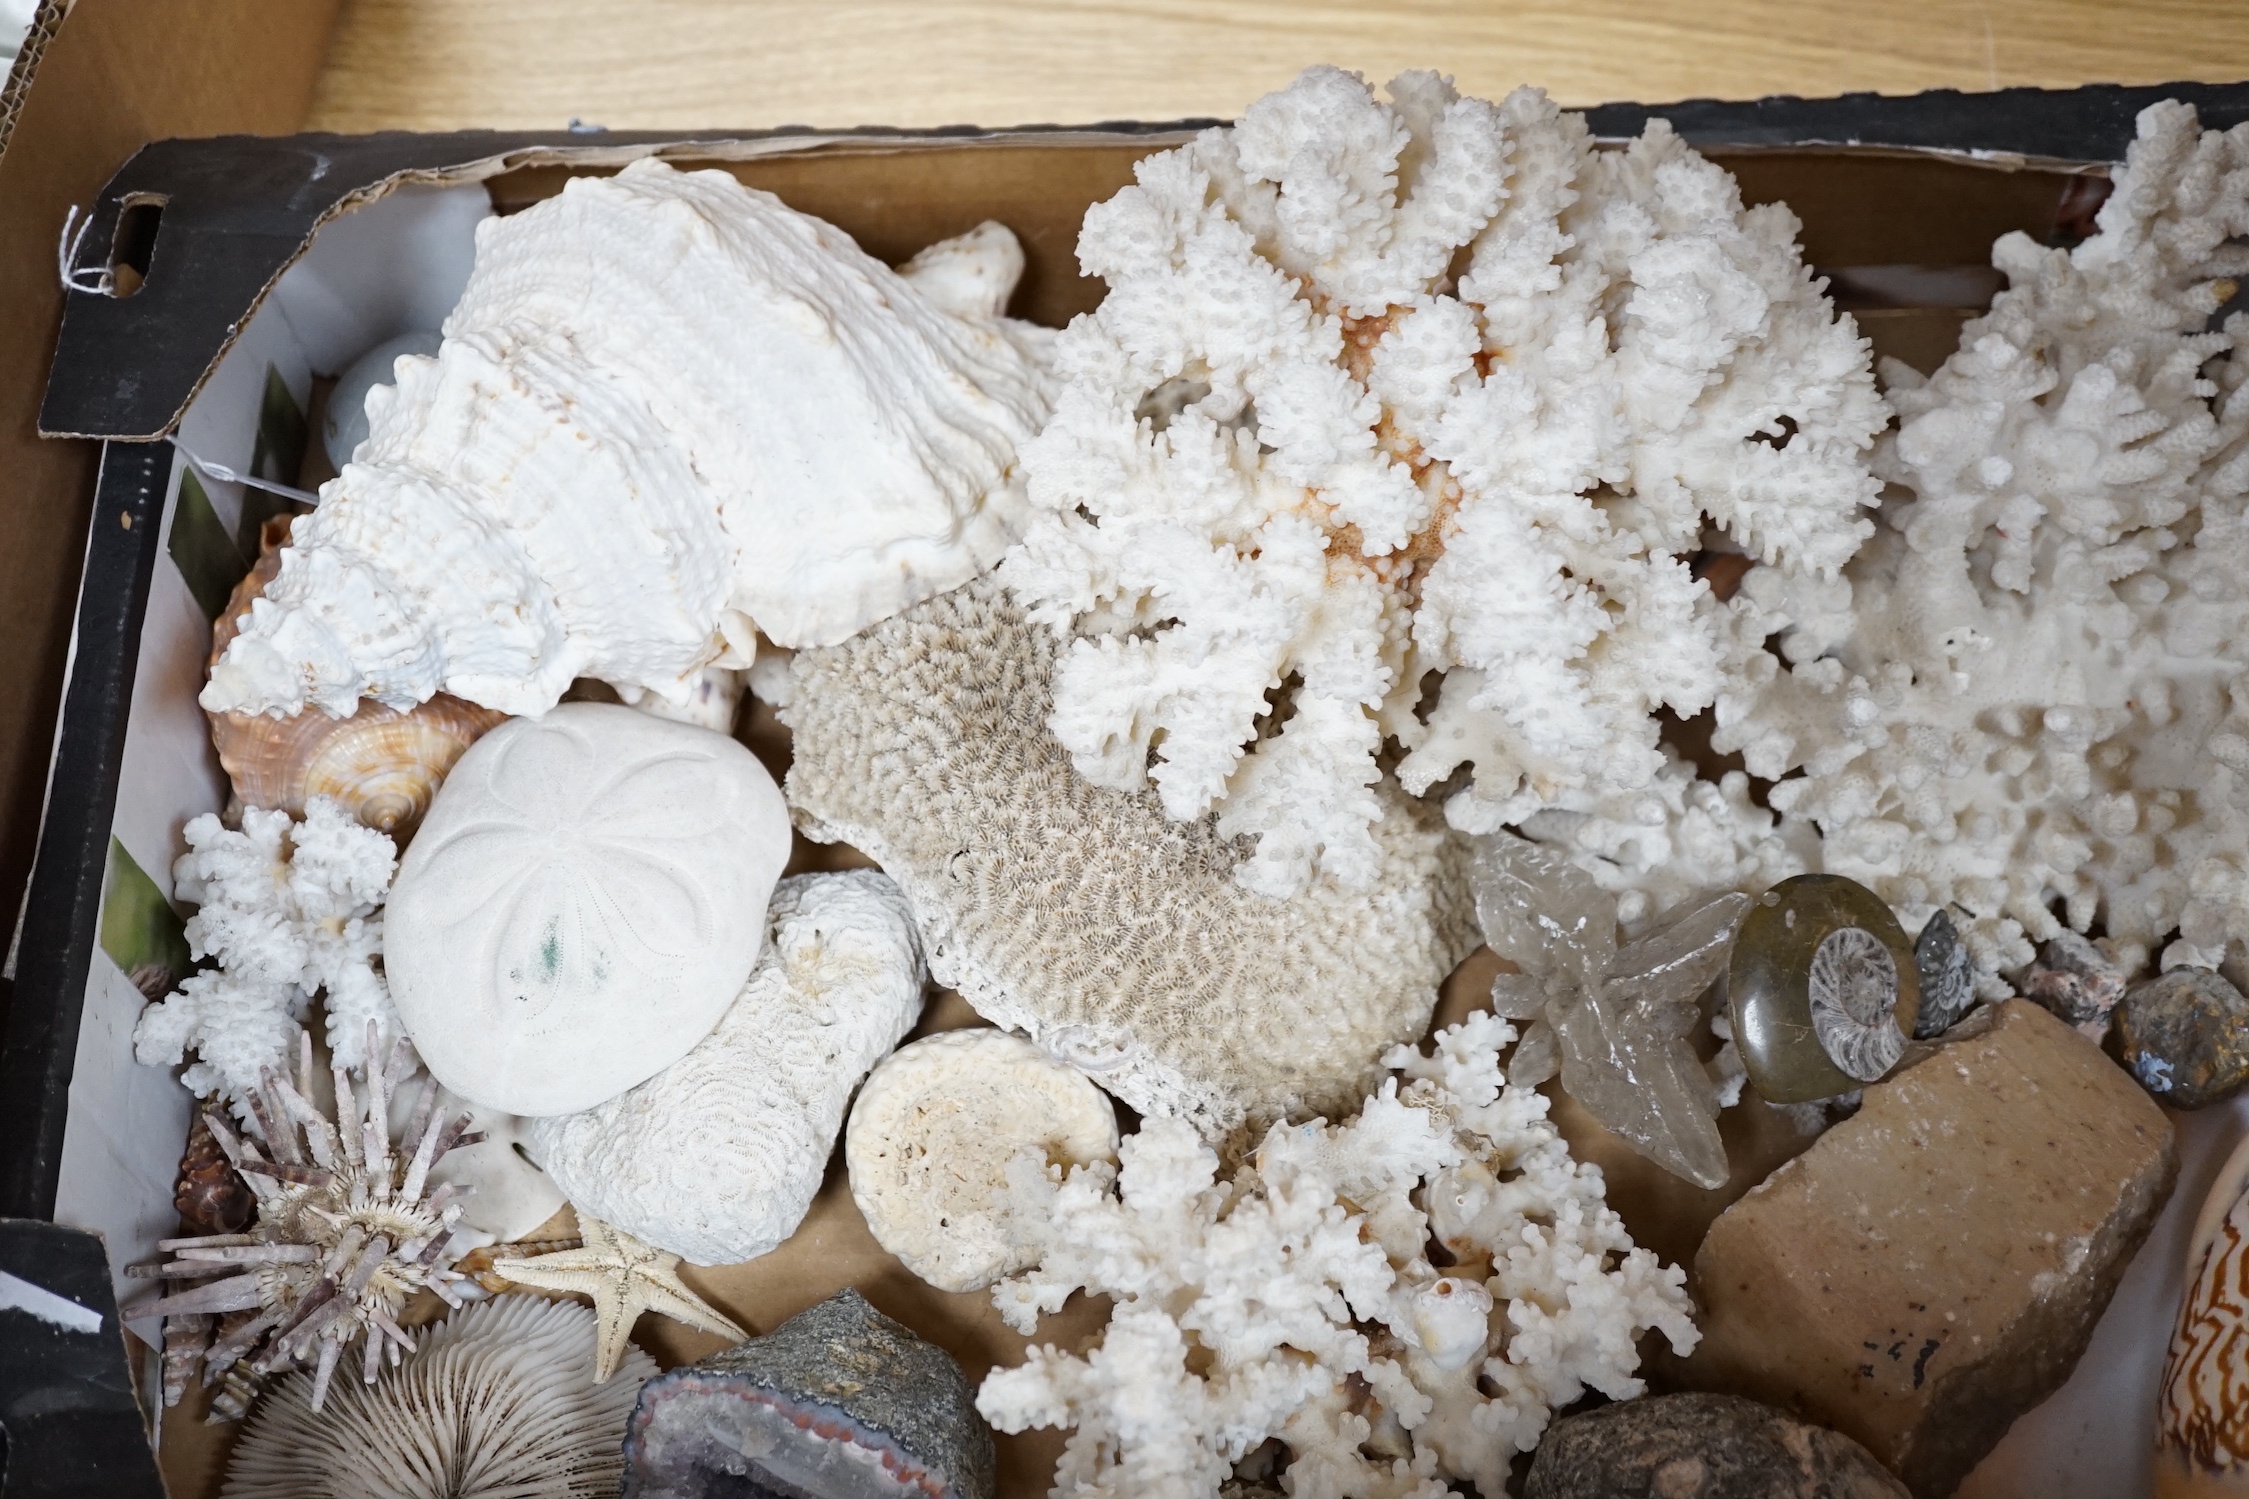 A group of various sea shells, corals, fossils etc.